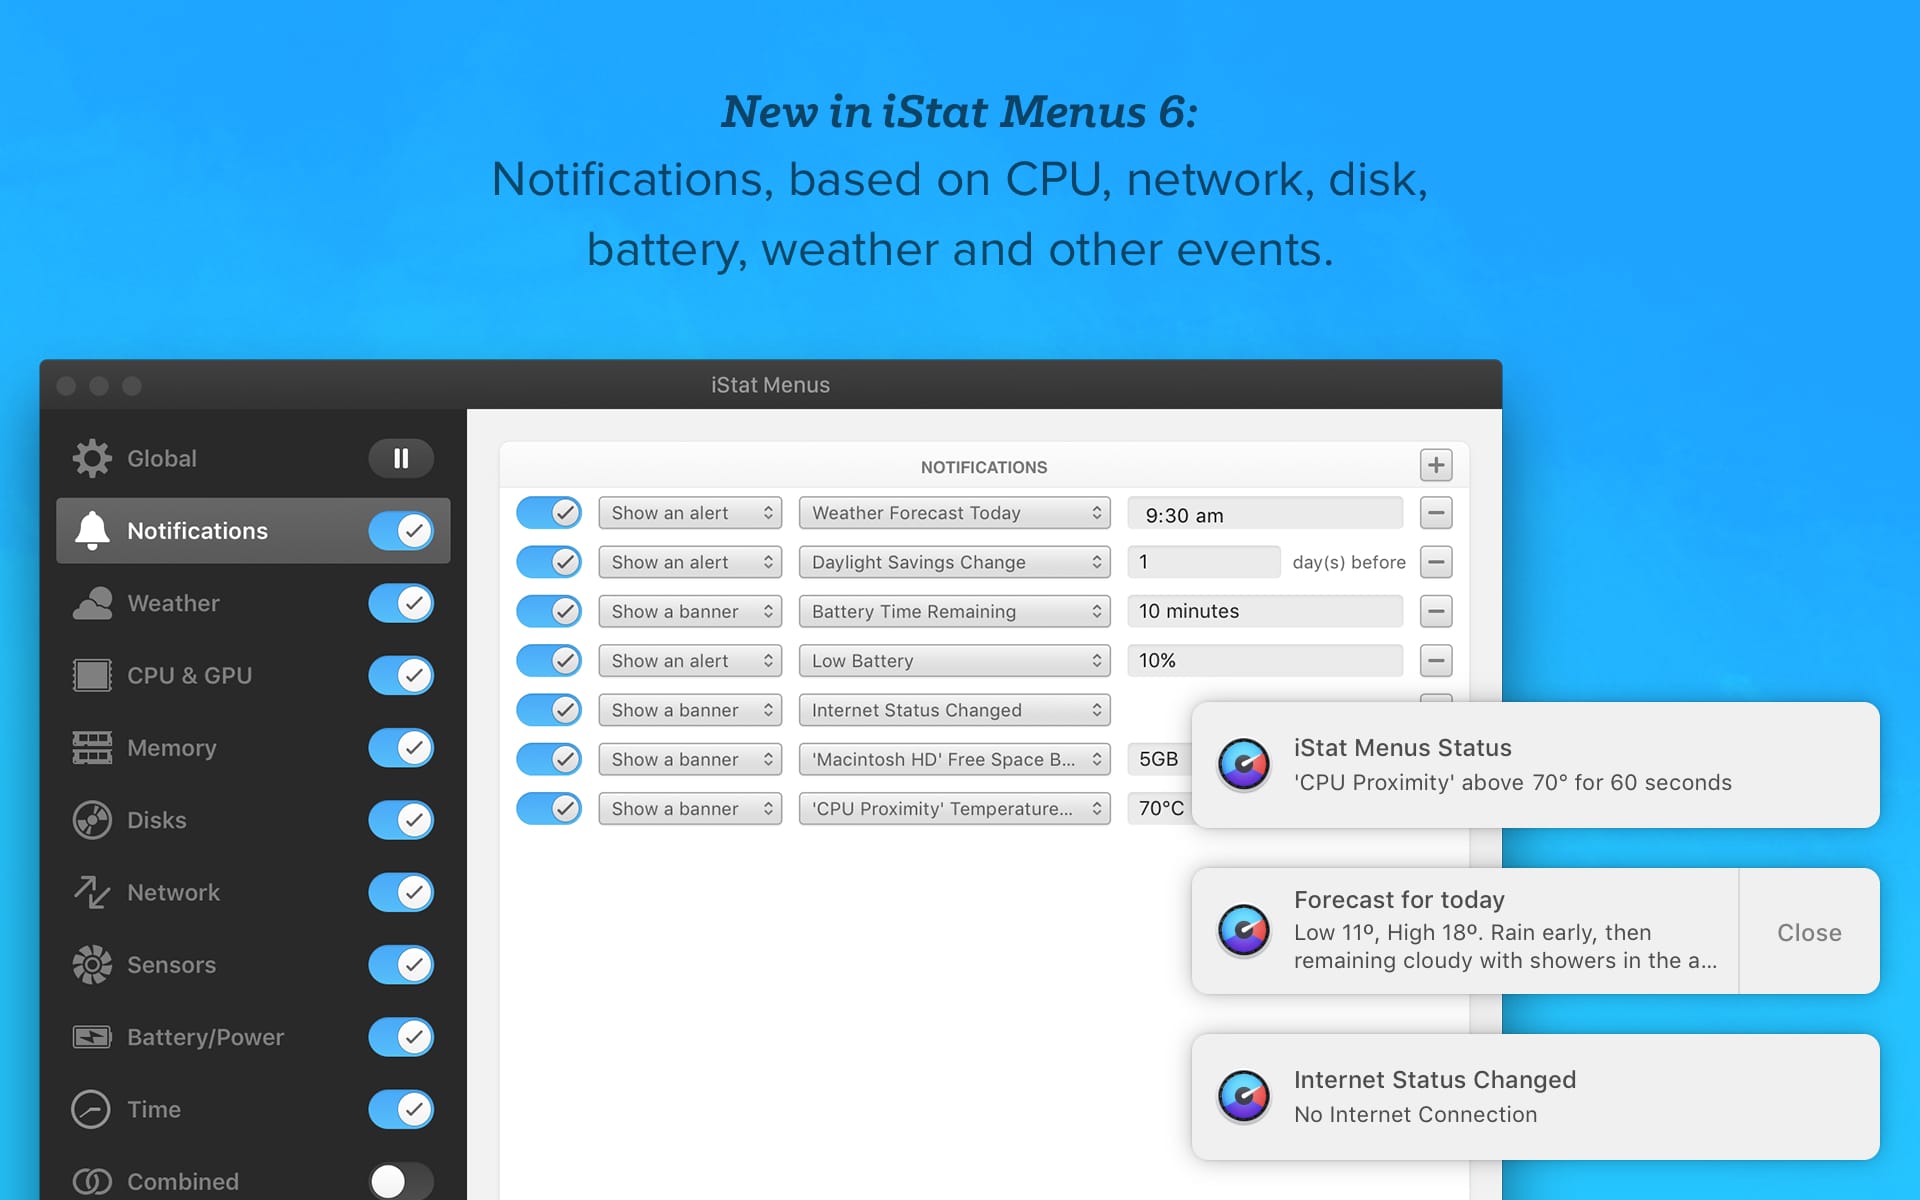 iStat Menus 6 download the new version for apple